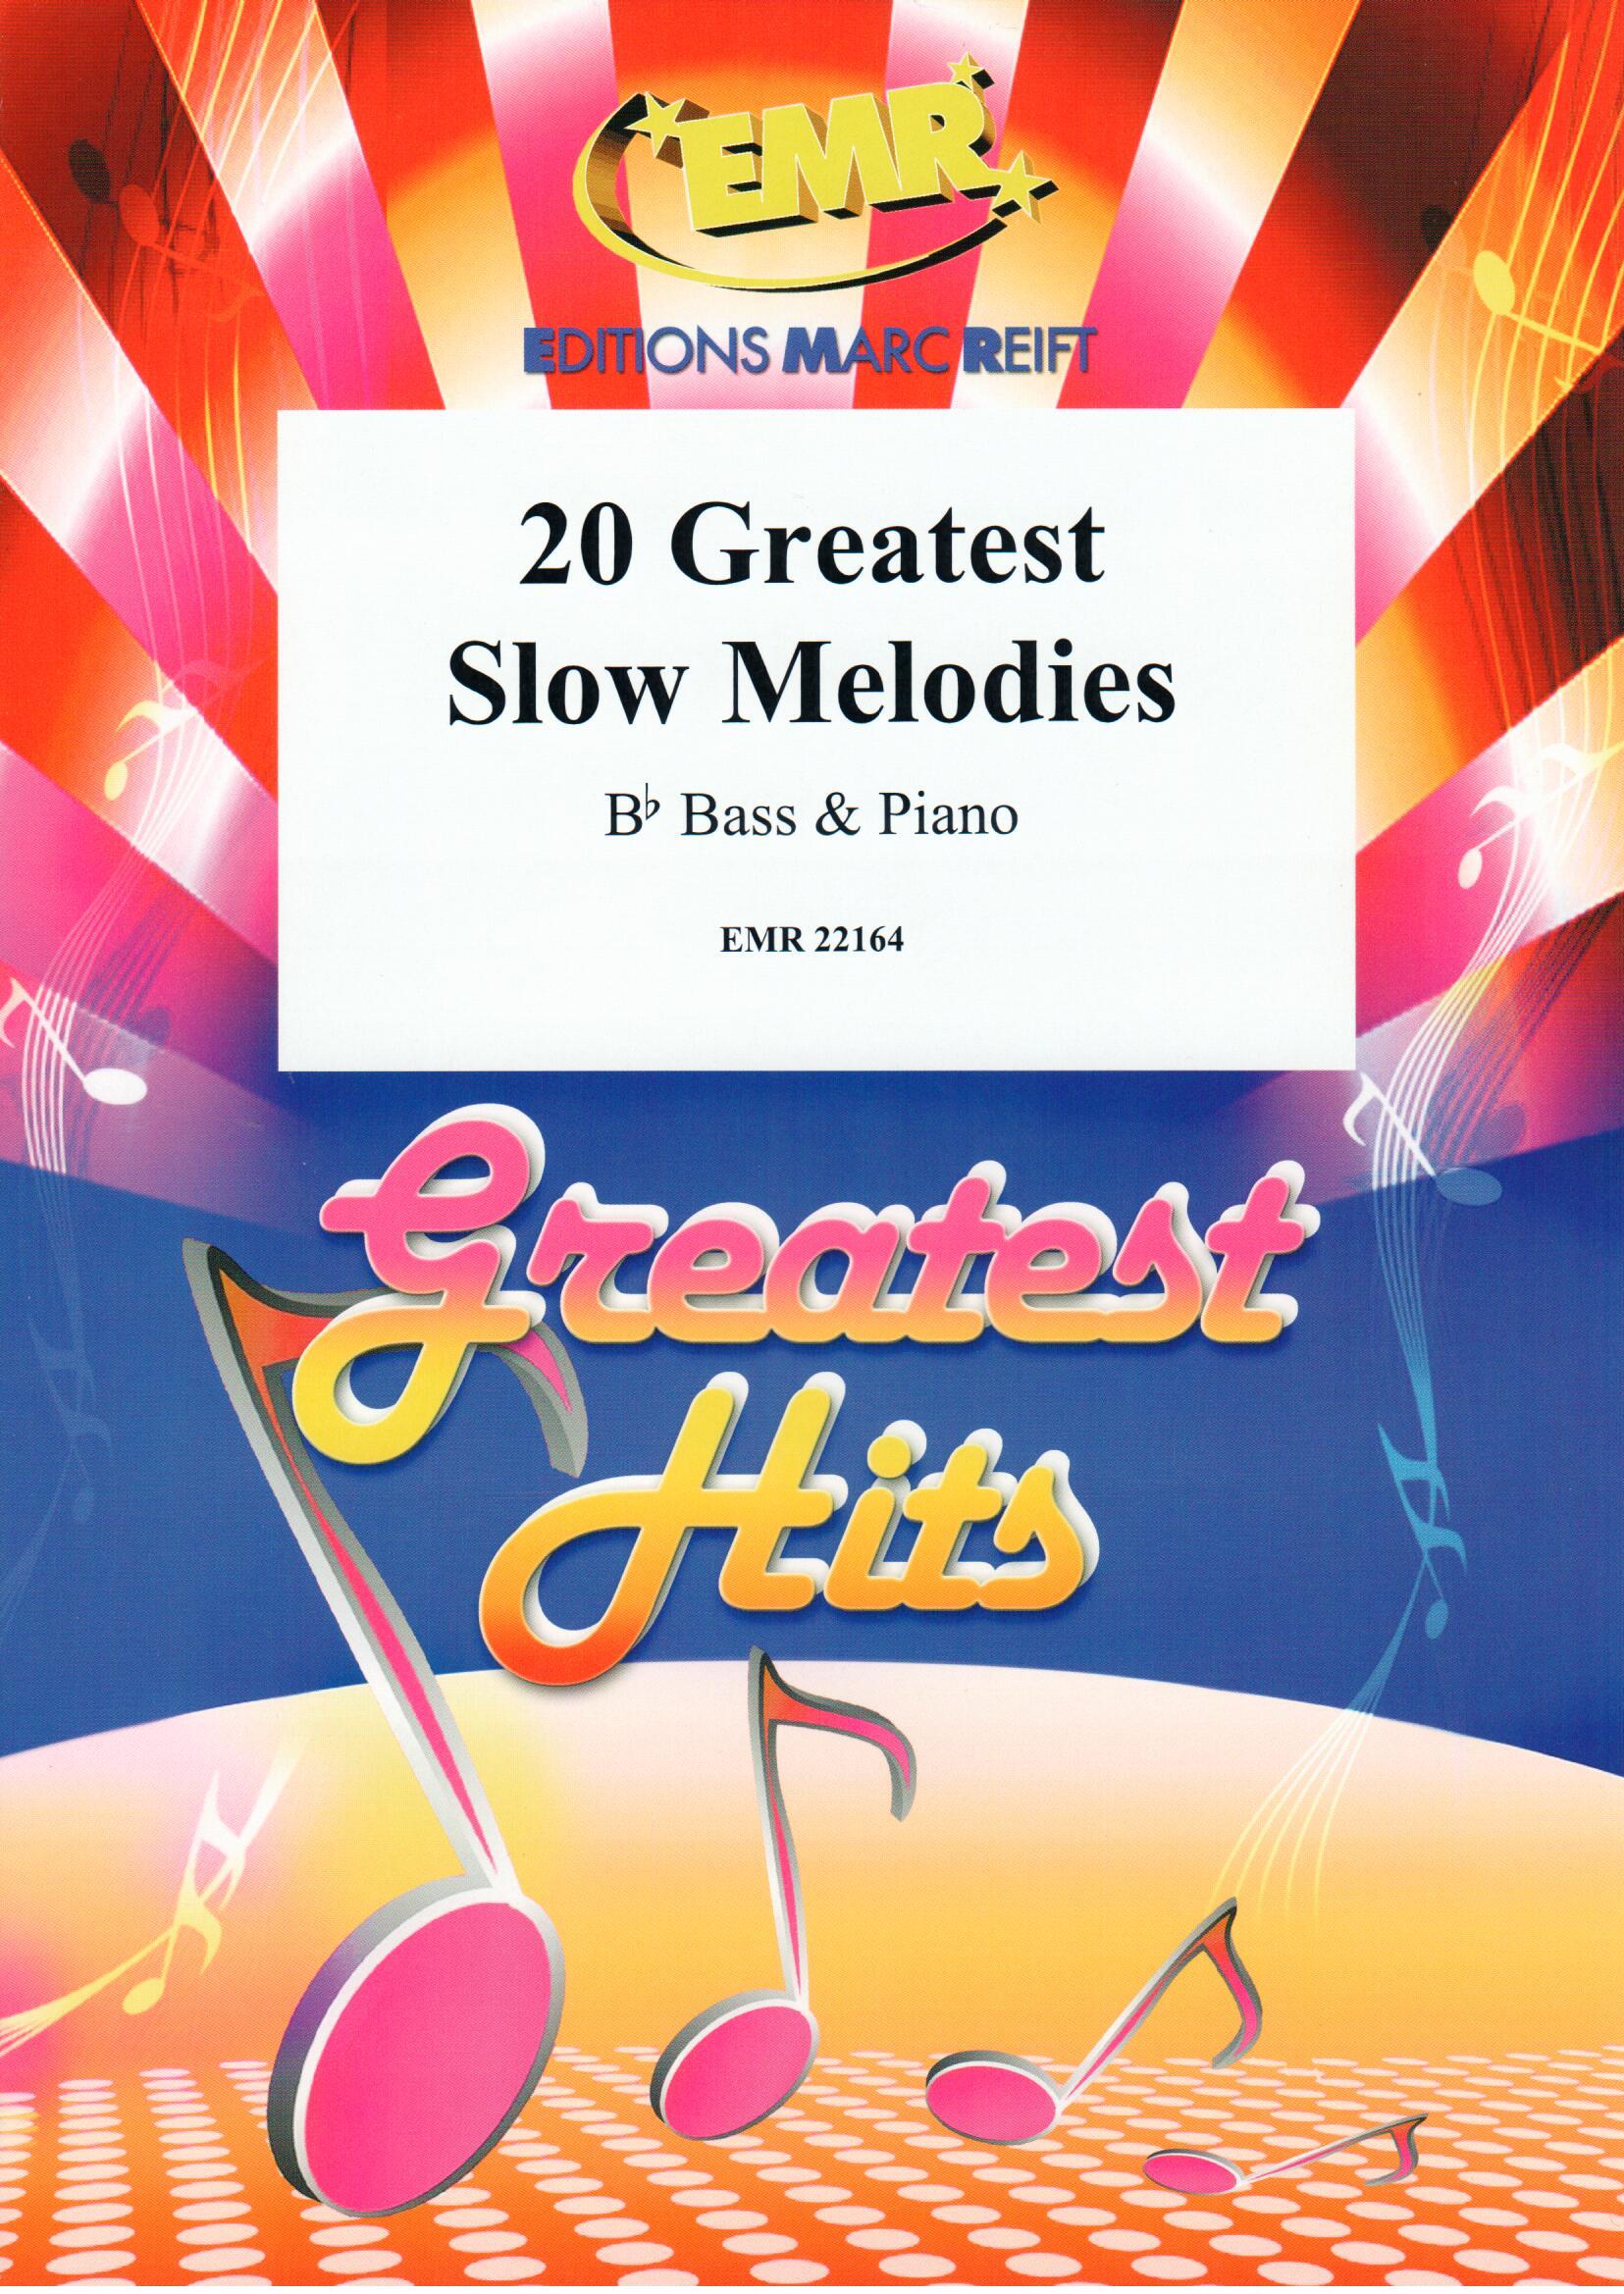 20 GREATEST SLOW MELODIES, SOLOS - E♭. Bass